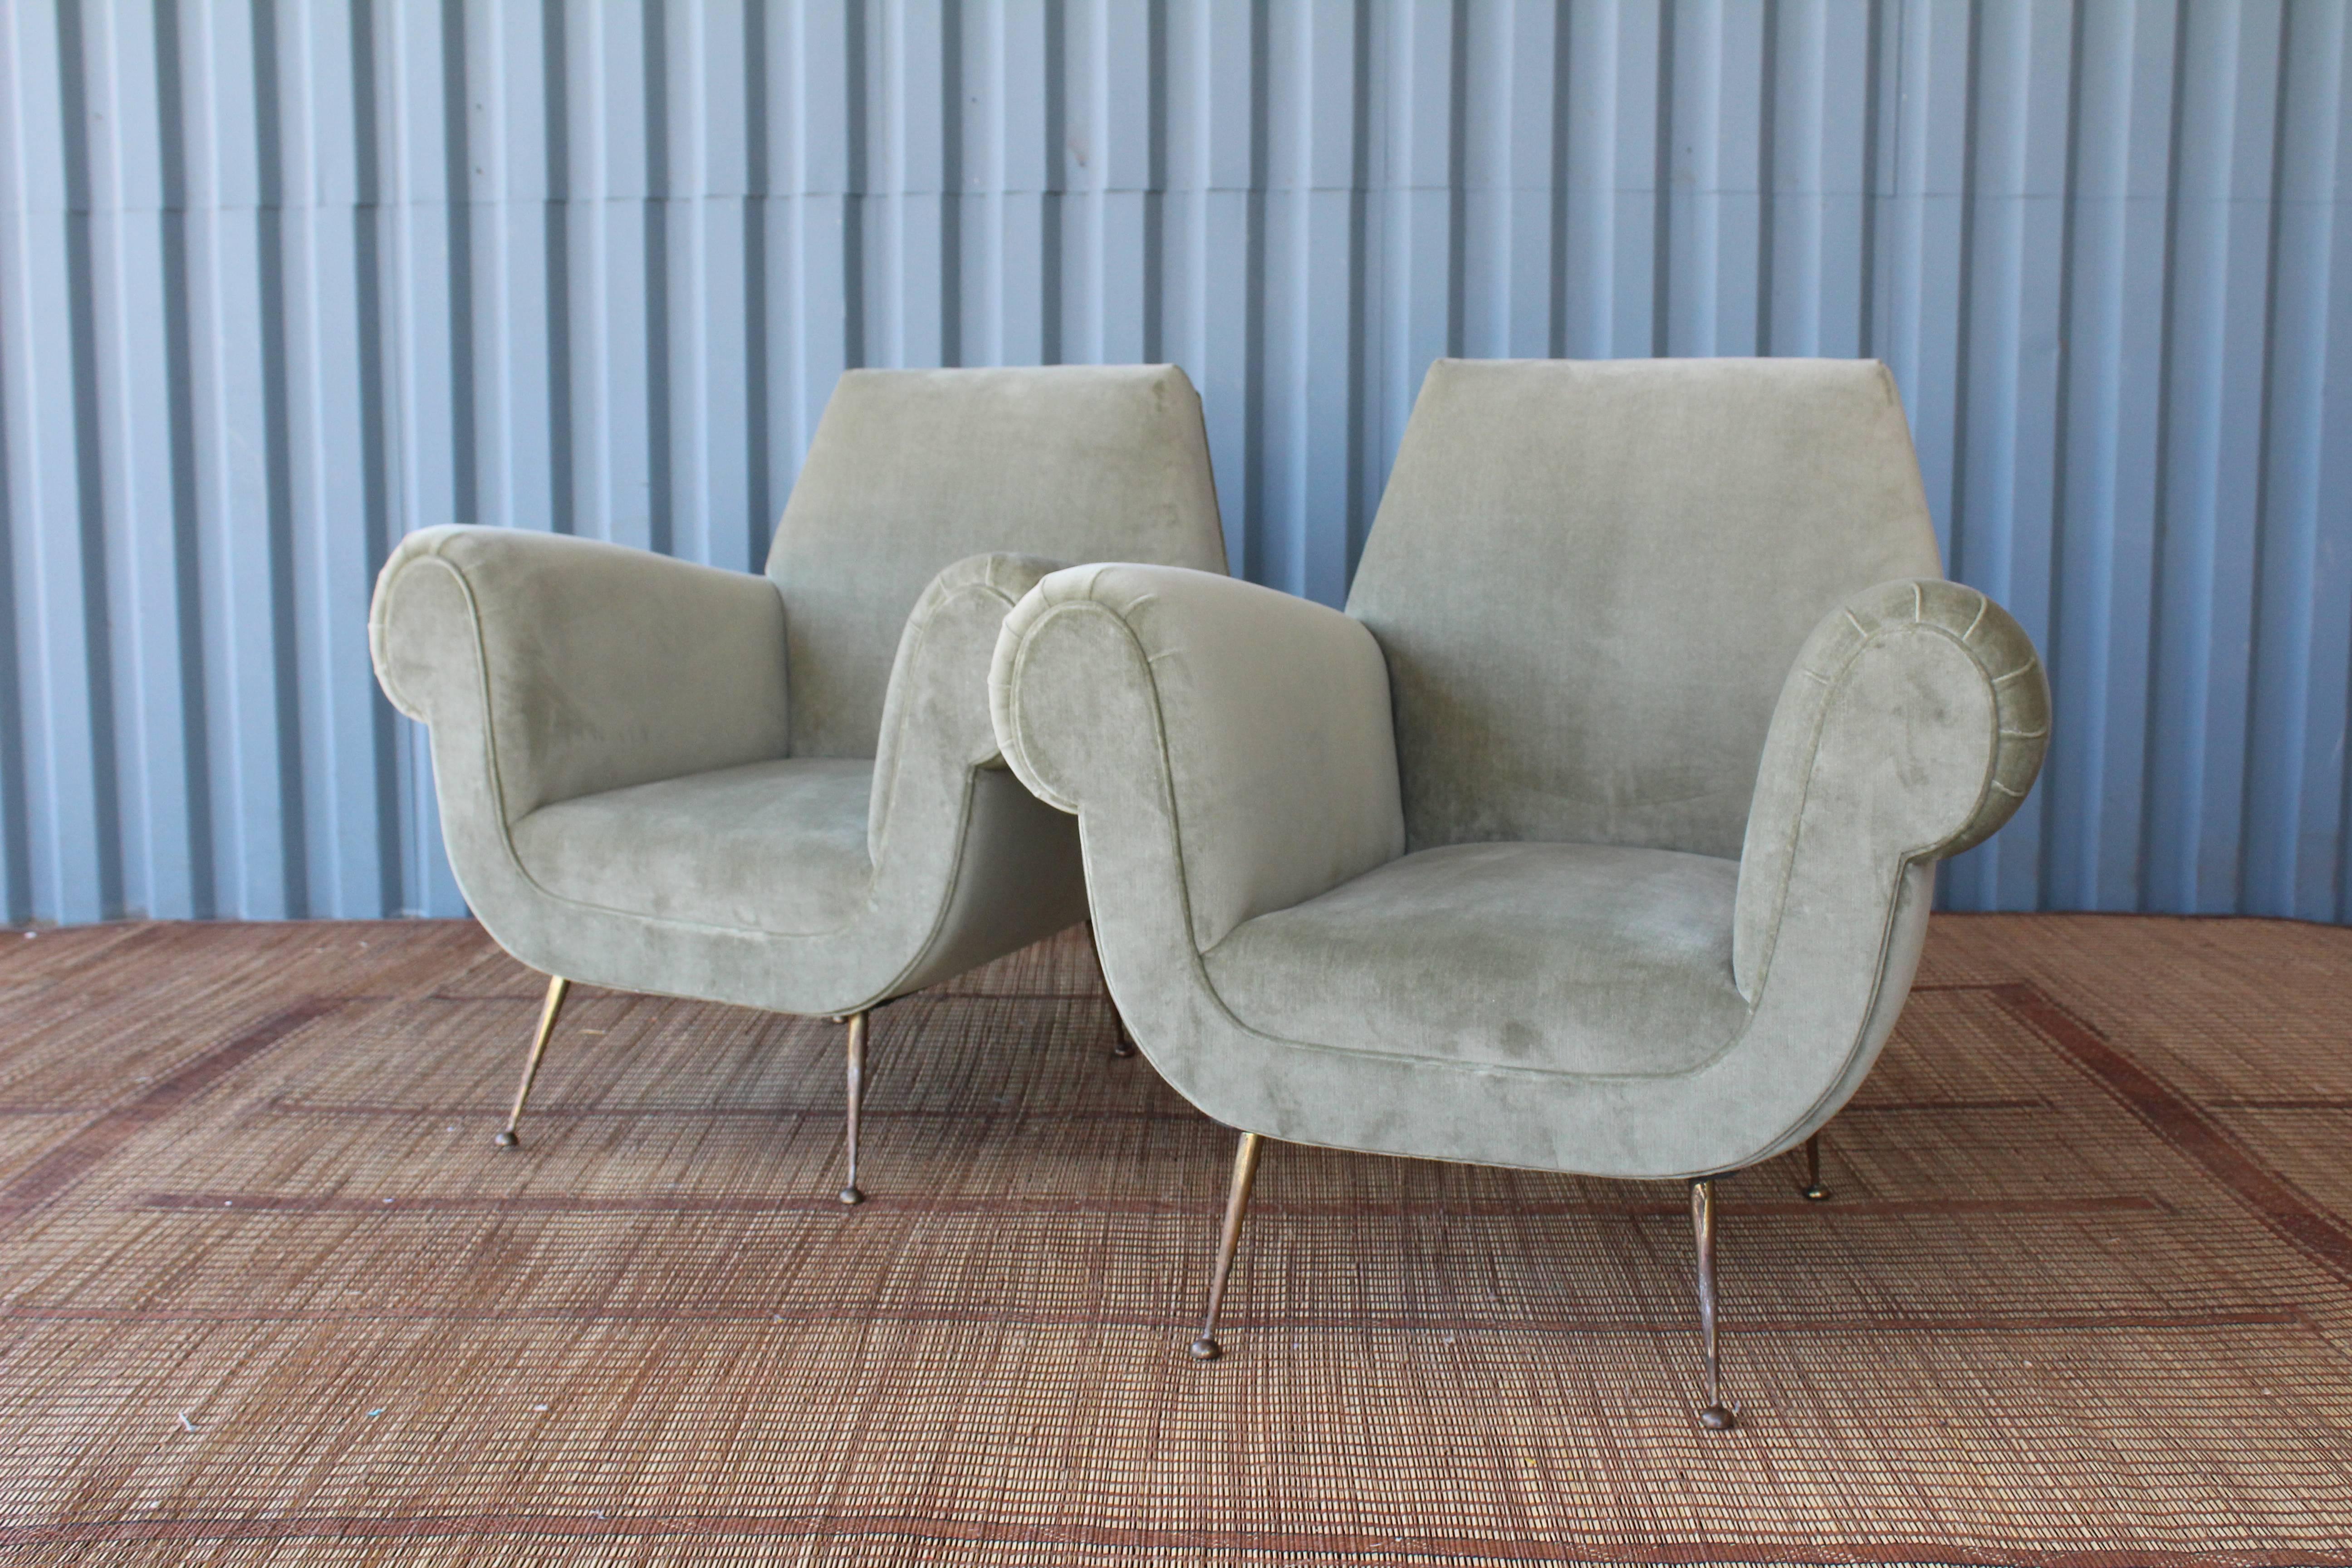 Lovely pair of 1950s Italian modern armchairs. Newly reupholstered in sage green velvet. Solid brass stiletto legs which have a wonderfully aged patina. In the manner of Gigi Radice for Minotti.
 